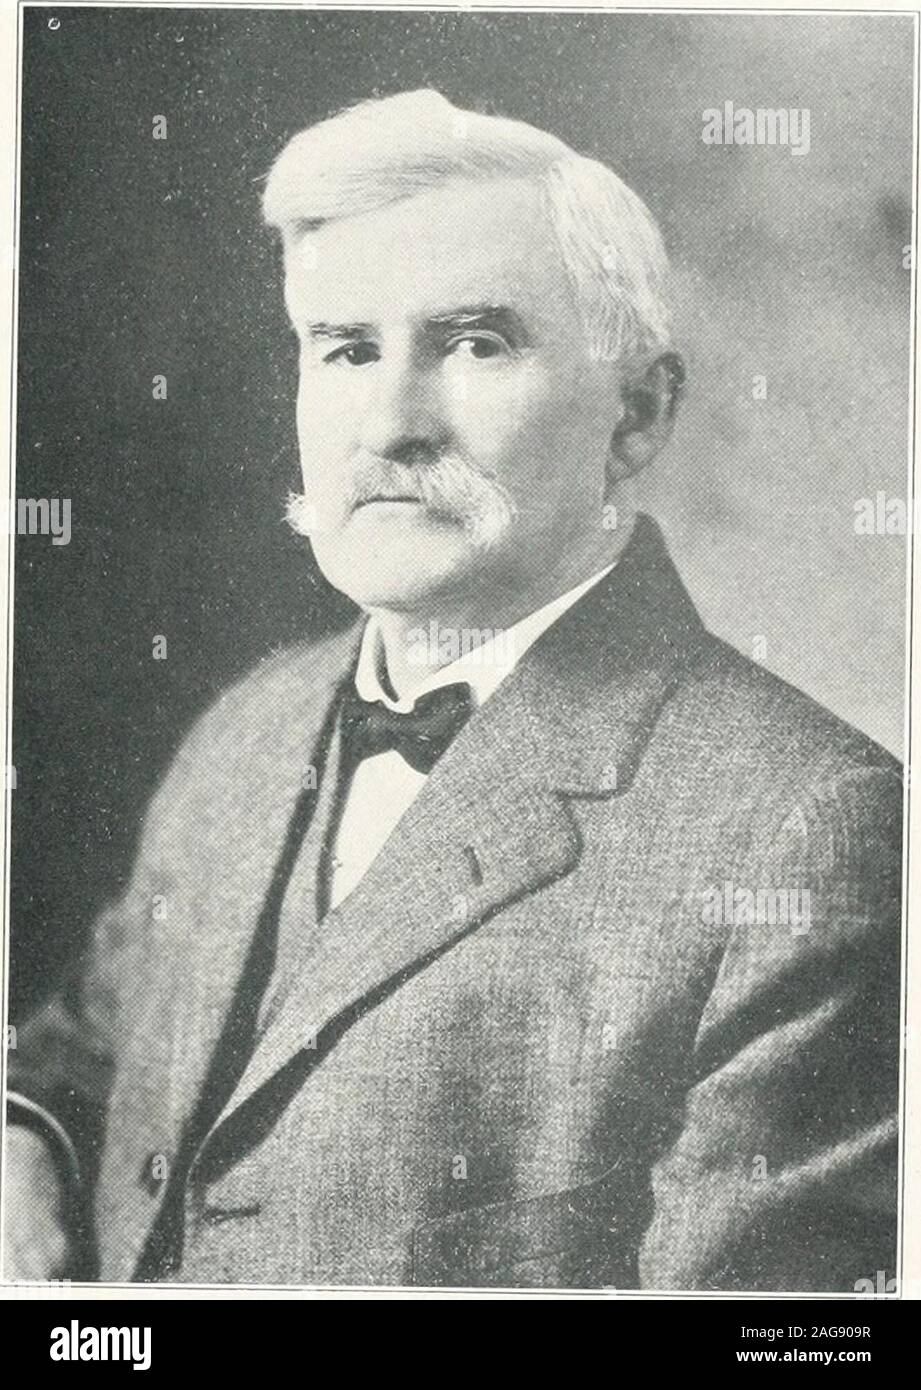 . History of Winnebago County and Hancock County, Iowa, a record of settlement, organization, progress and achievement ... he study of law in Aledo, Mercer county. He was admitted to the bar atOttawa, Illinois, Sejilcnibcr 23. 1S7S, and tor a time practiced at Aledo ami RockIsland, but in 1881 removed to Ottawa, Kansas, and was admitted to the Kansasbar November 14, 1884. On the 2d of January. 1891, he became a residentof Corwith, Hancock county. Iowa, and on the 4th of October, 1894, became amember of the Iowa bar. He has since licen admitted to practice in the federalas well as the state cou Stock Photo